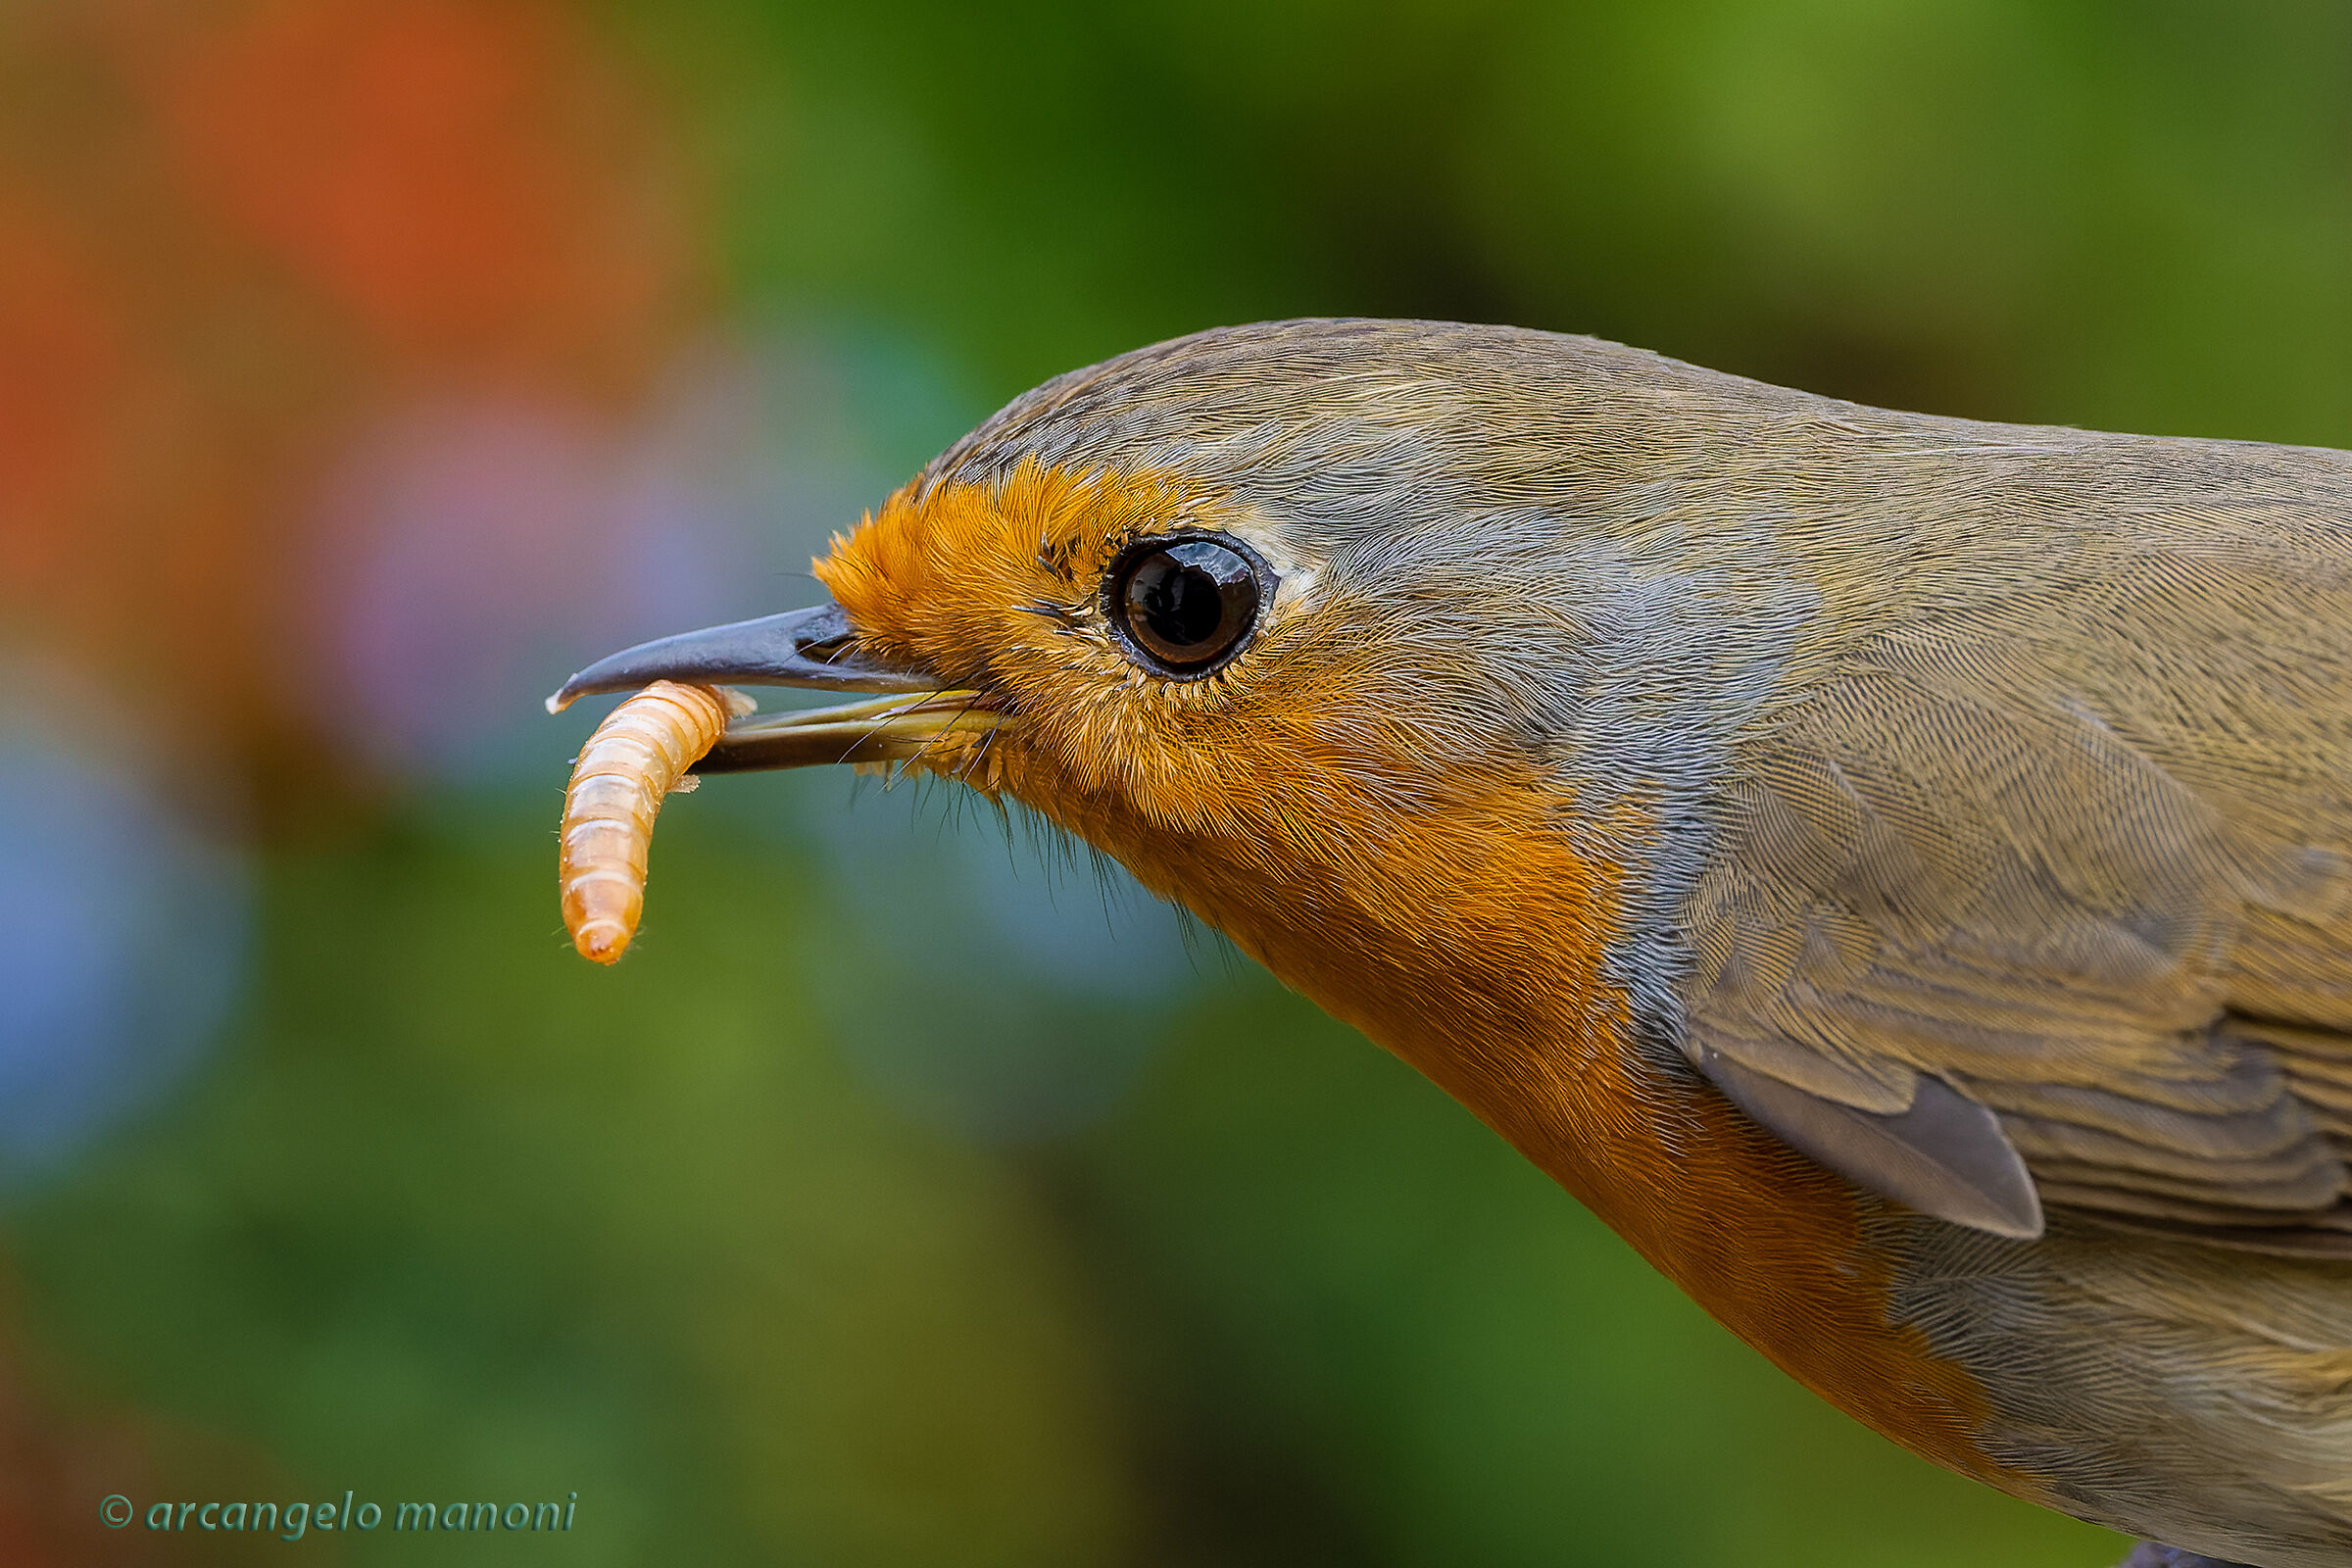 The conquest of the mealworm...